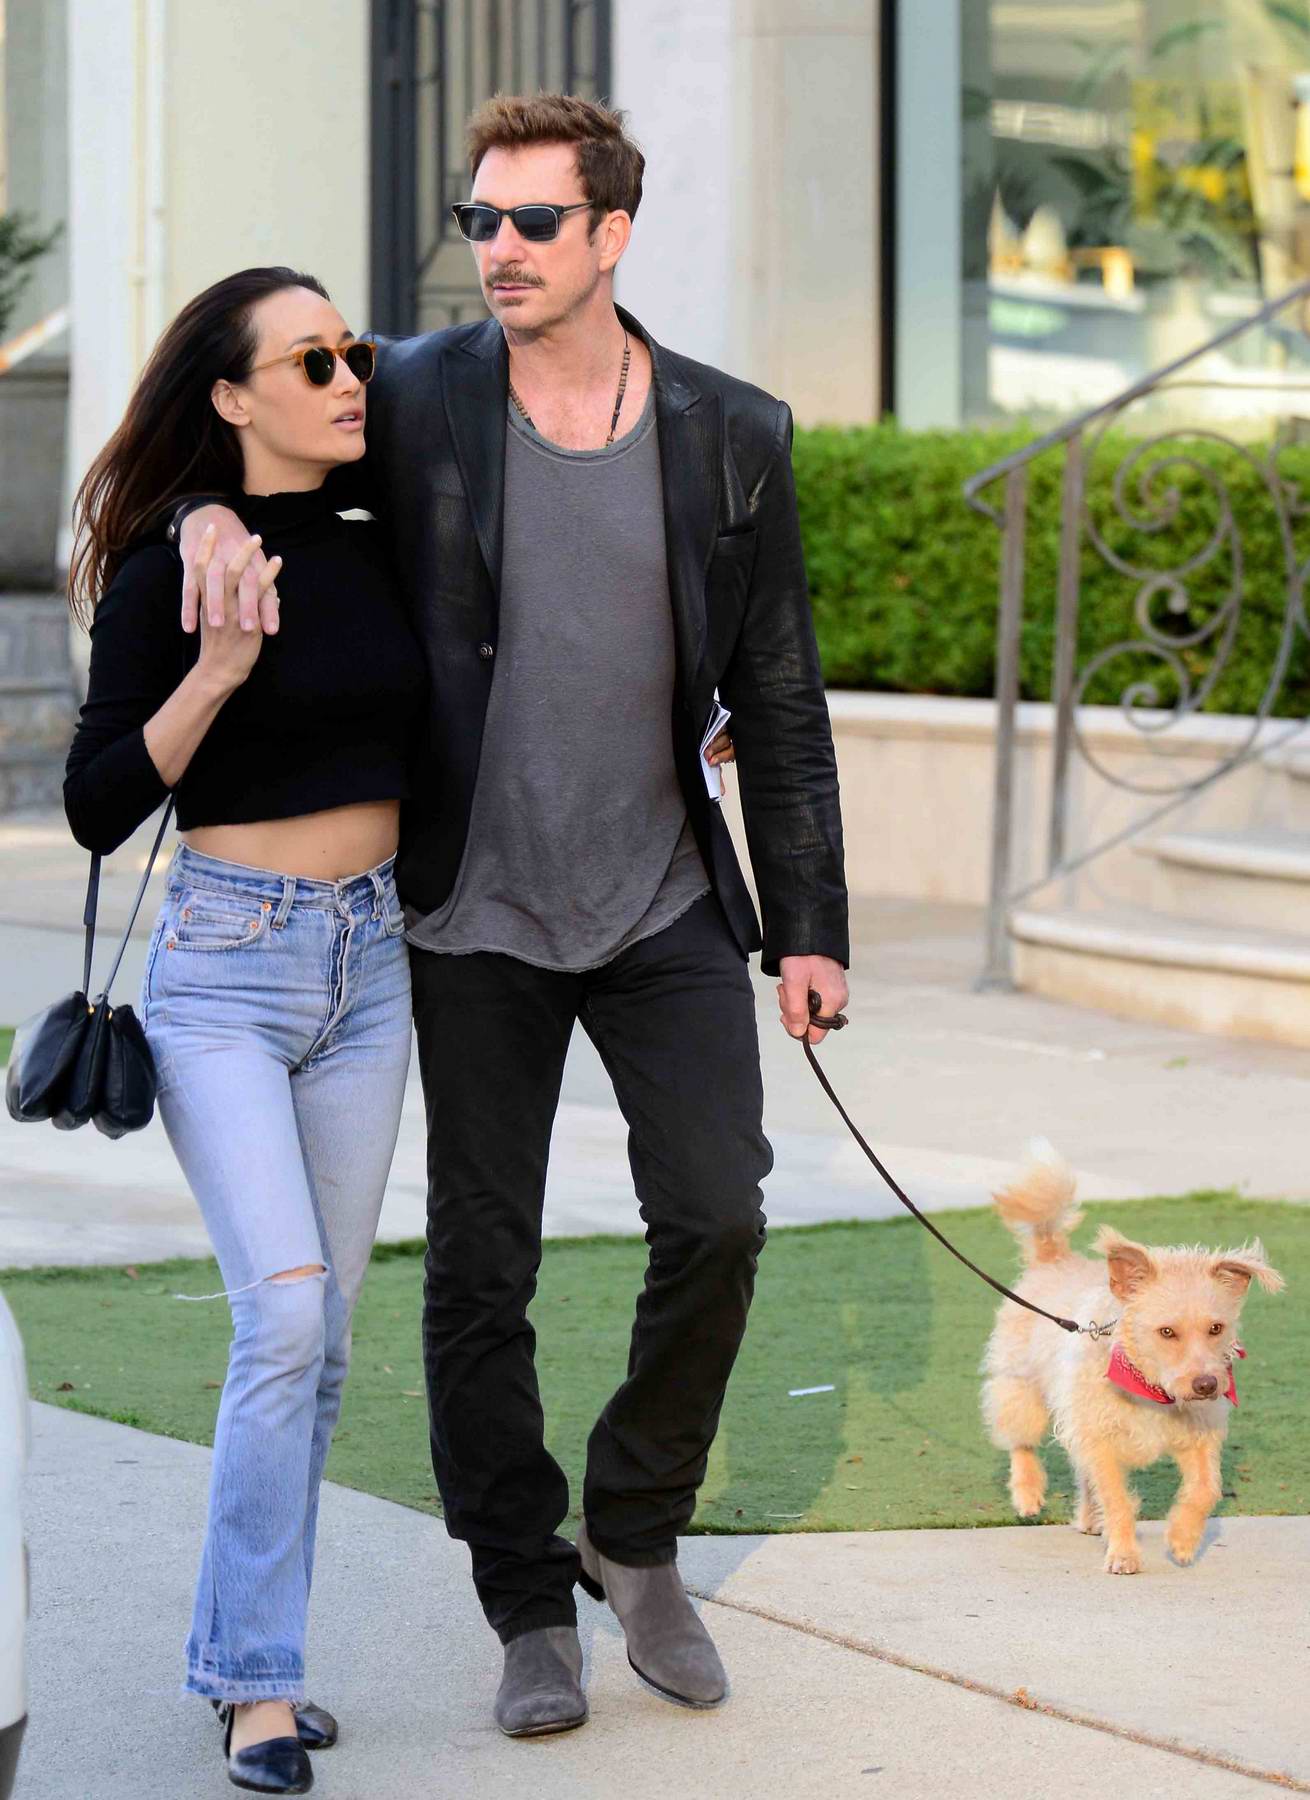 Maggie Q and boyfriend Dylan McDermott out for a walk with their dog on